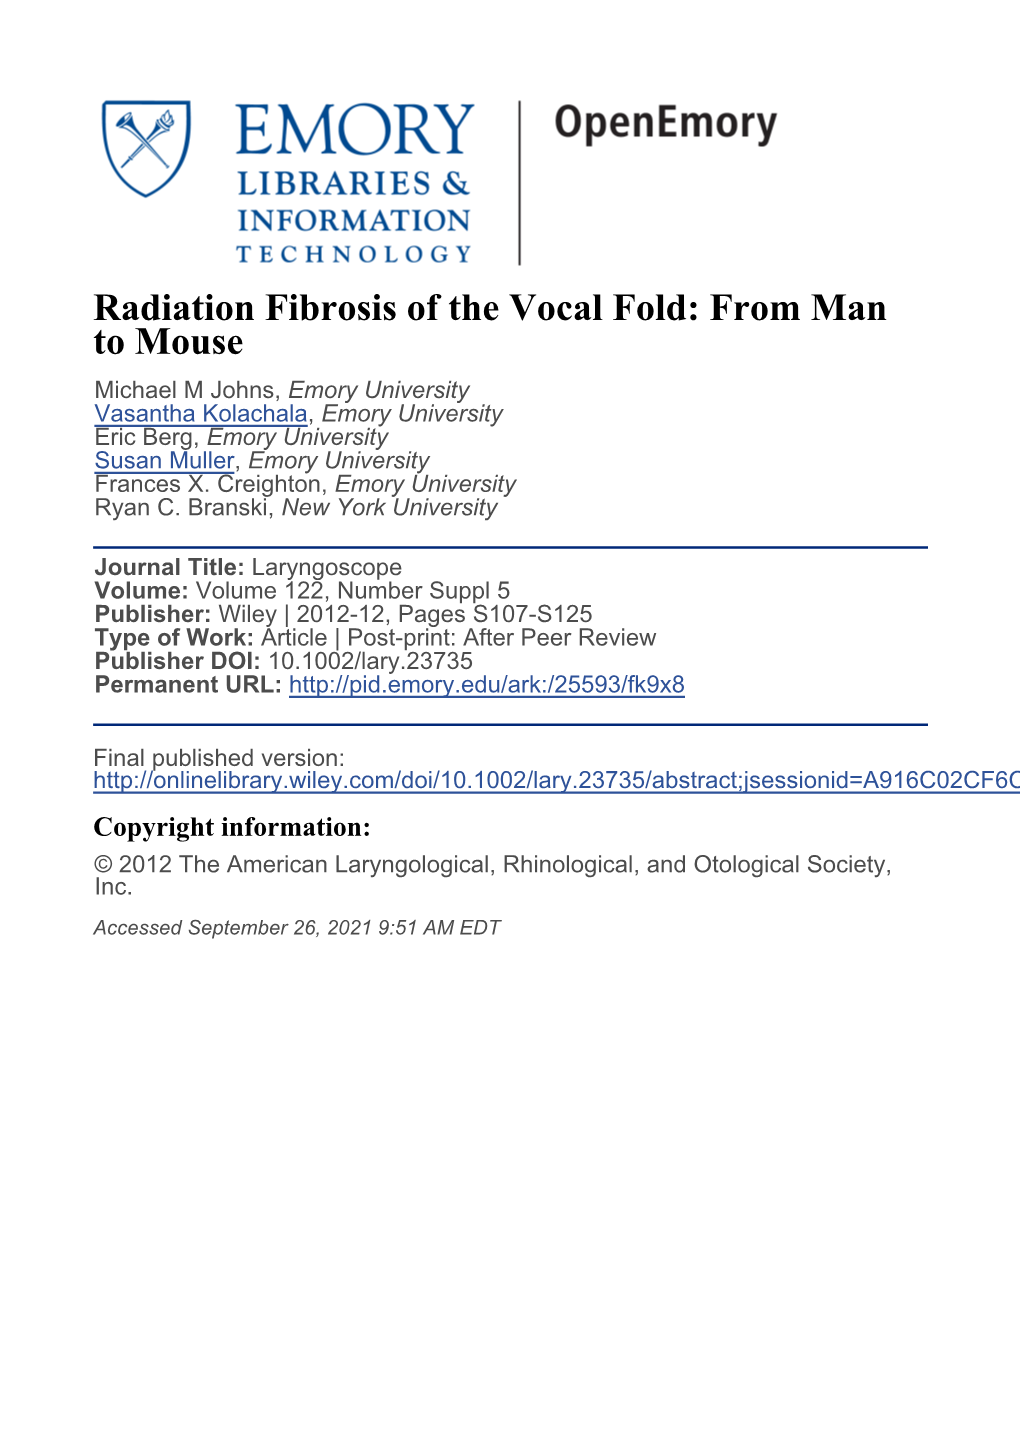 Radiation Fibrosis of the Vocal Fold: from Man To